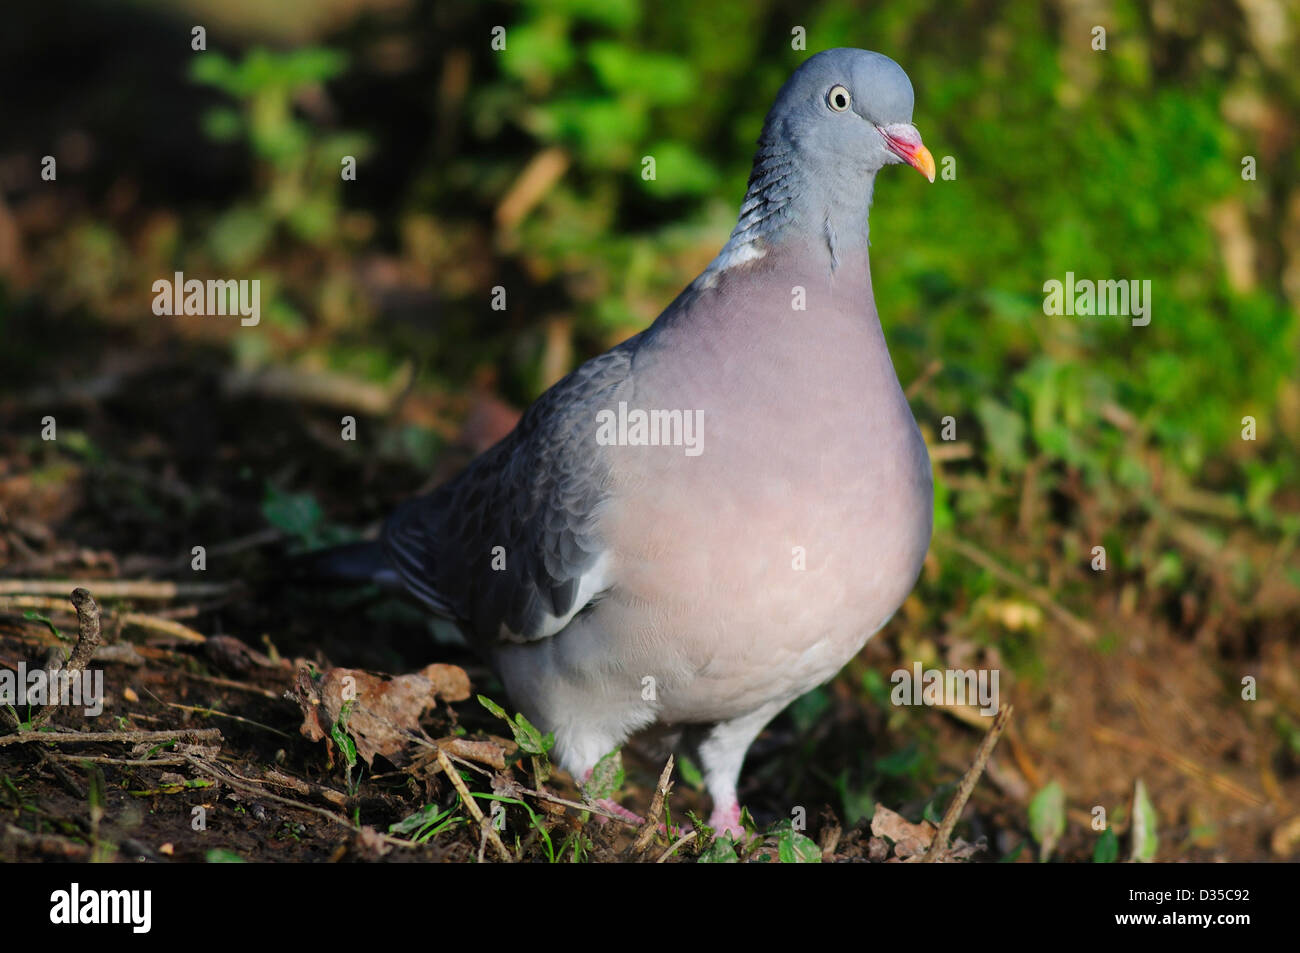 A woodpigeon on the ground Stock Photo